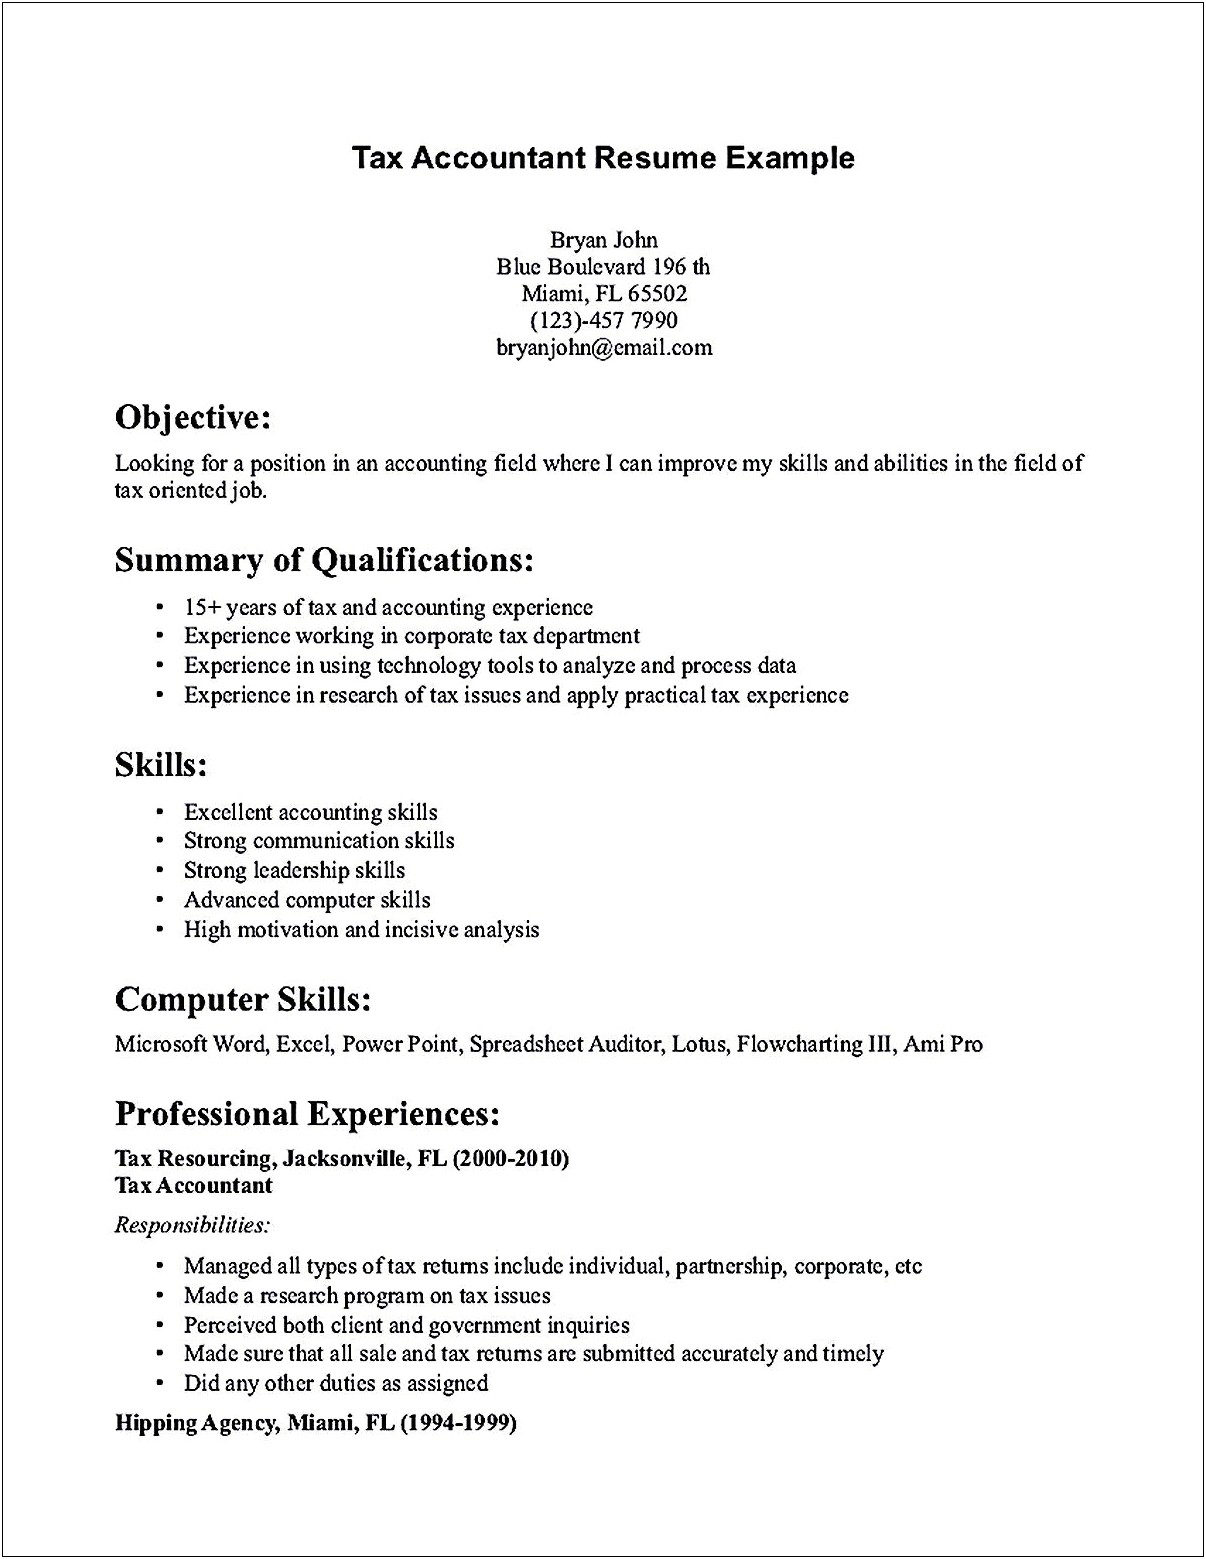 Summary Of Qualifications On Resume Accounting